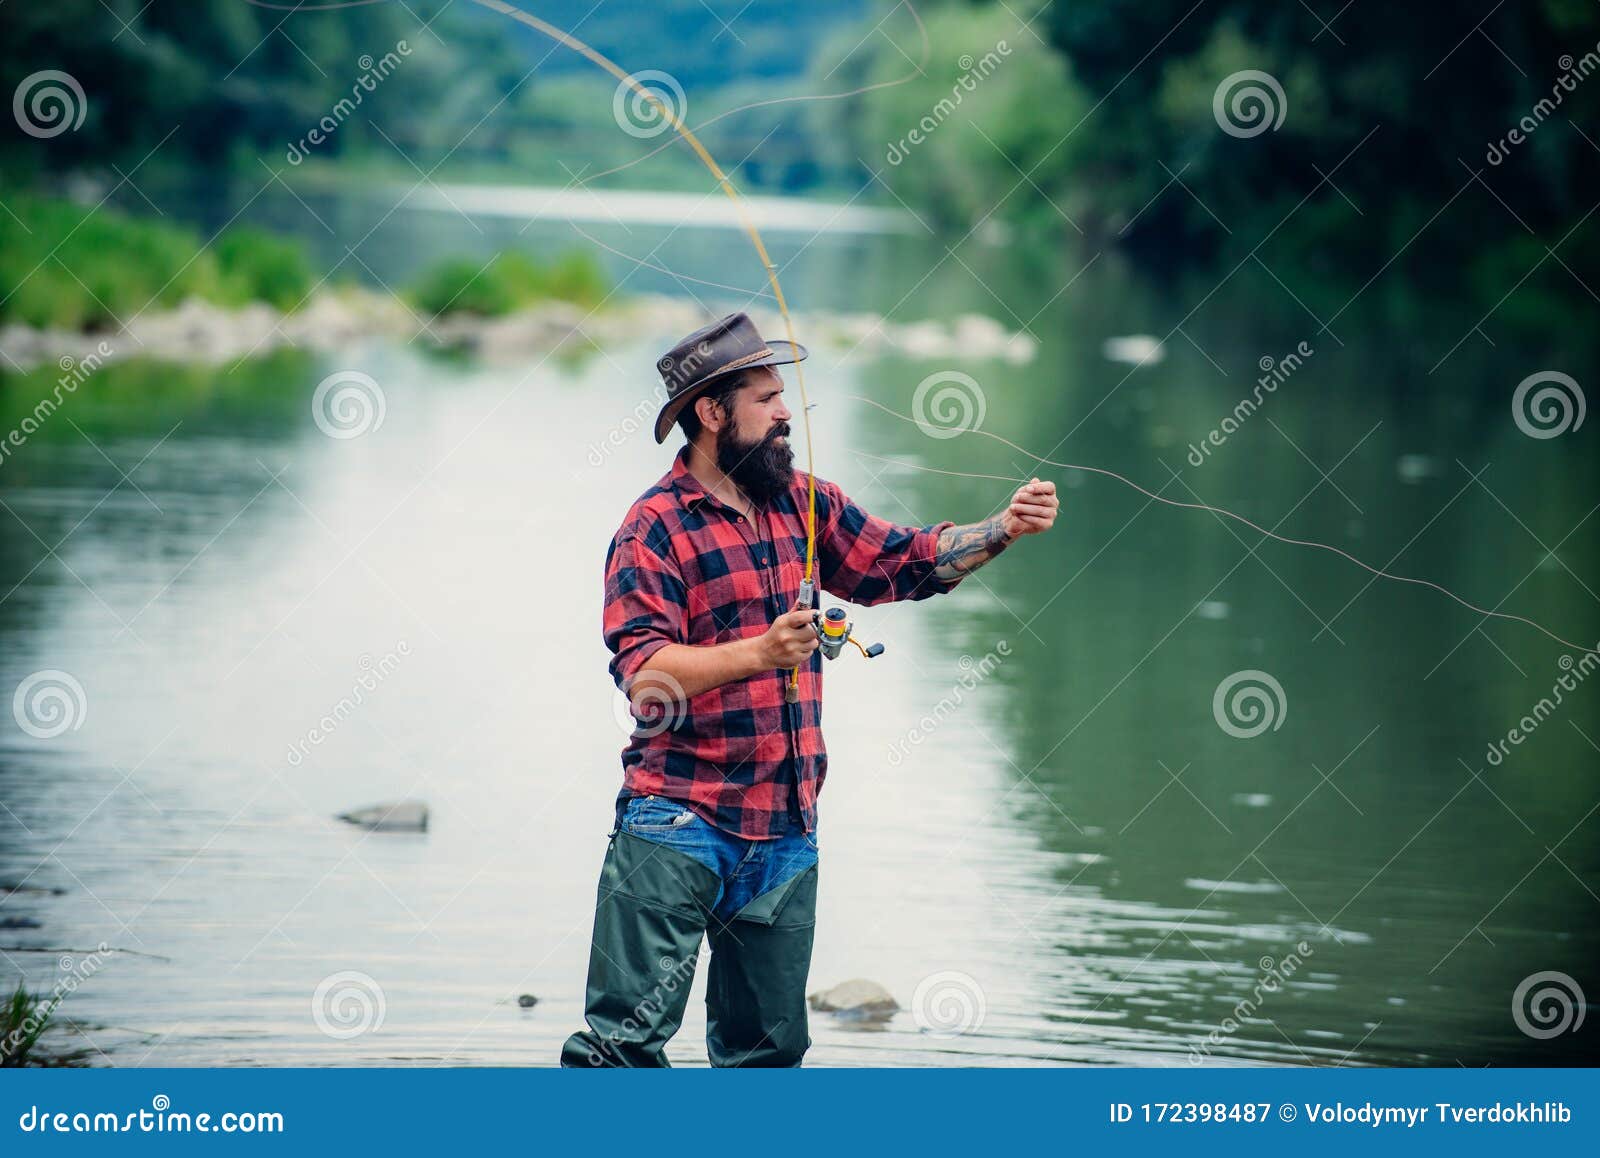 Fishing. Brutal Man Stand in River Water. Man Bearded Fisher. Man